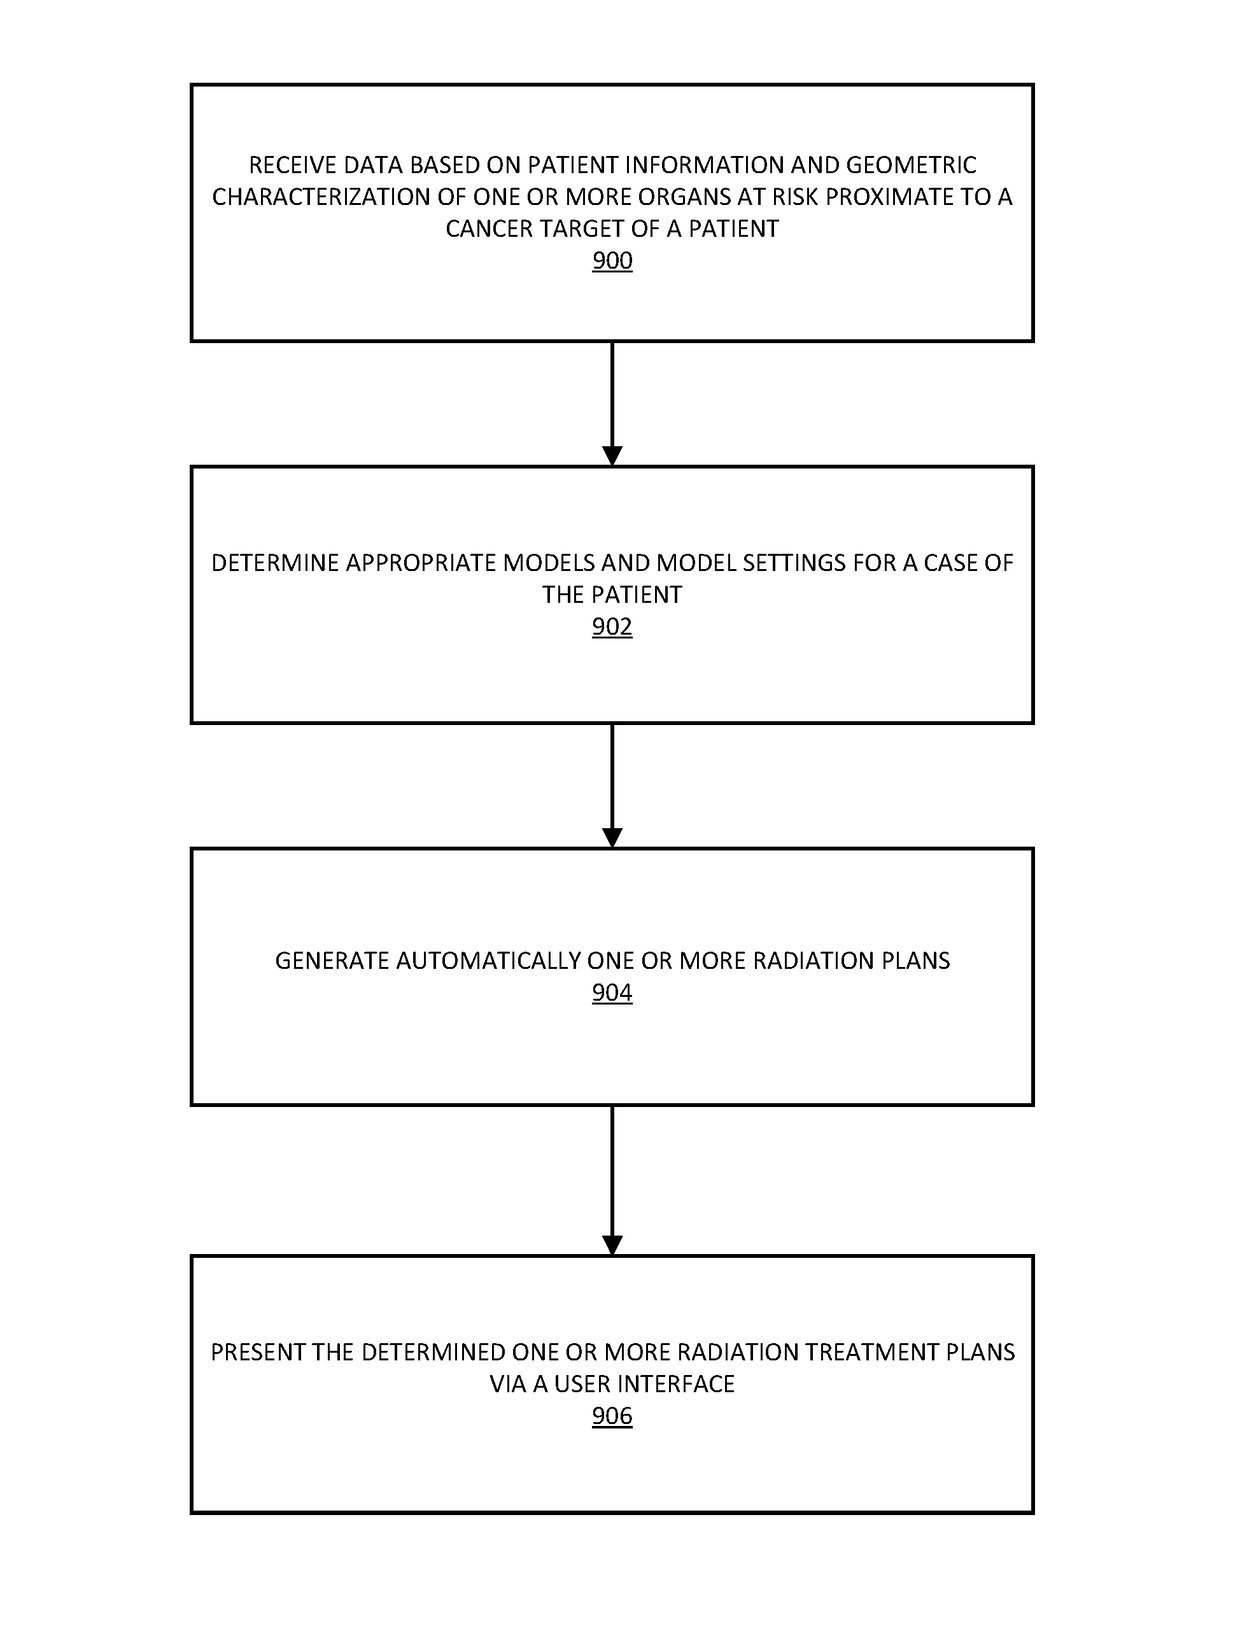 Systems and methods for automated radiation treatment planning with decision support